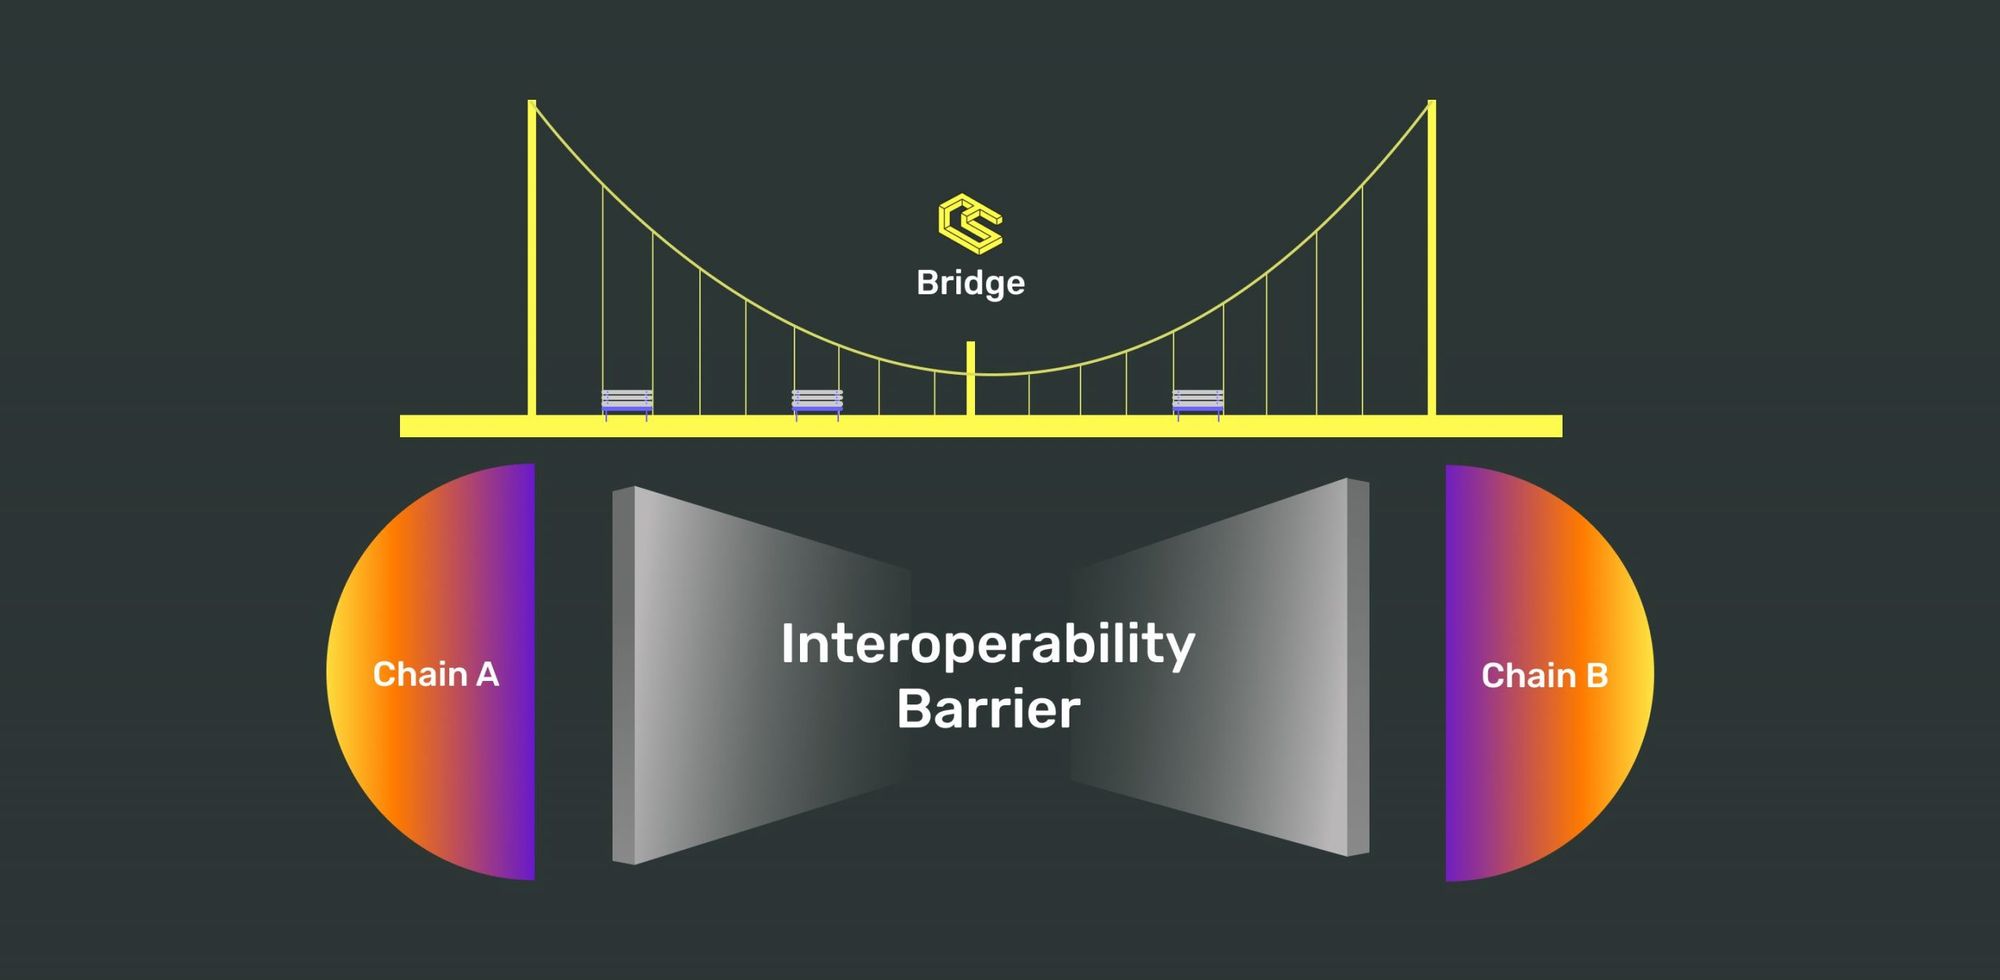 Interoperability Barrier Image by academy.moralis.io